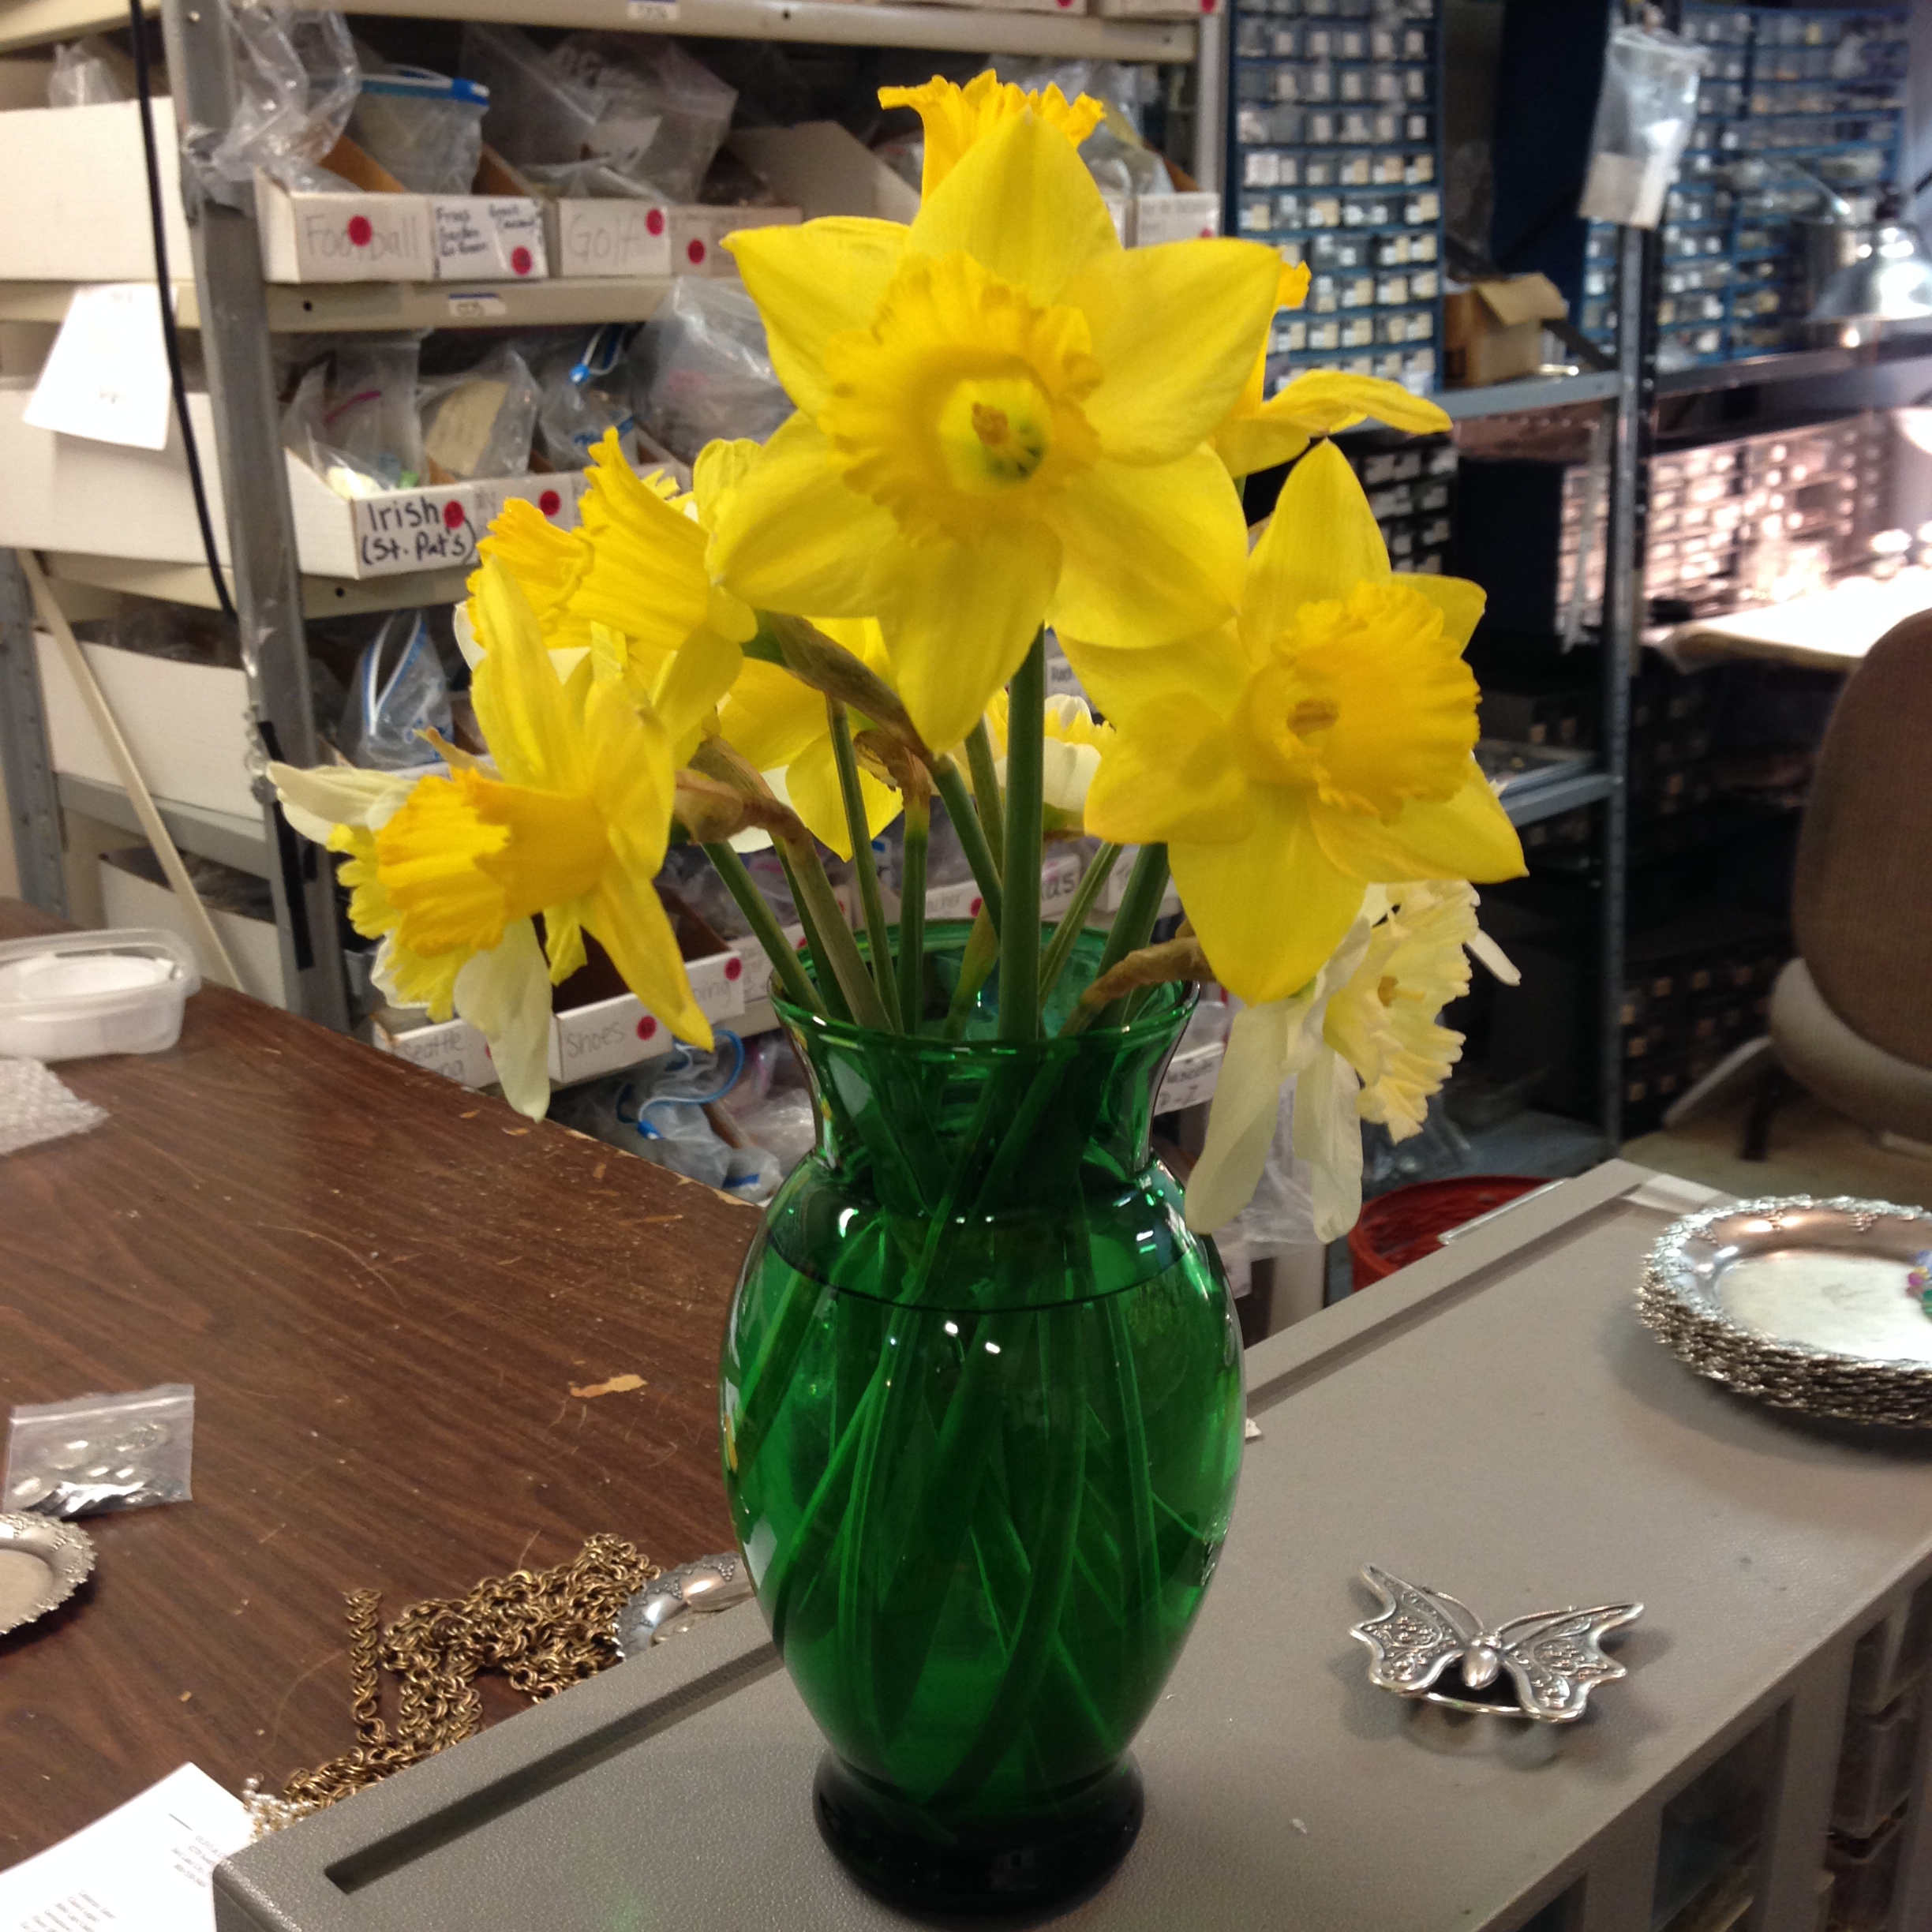 flower displays bring cheer to the Classic Legacy workroom